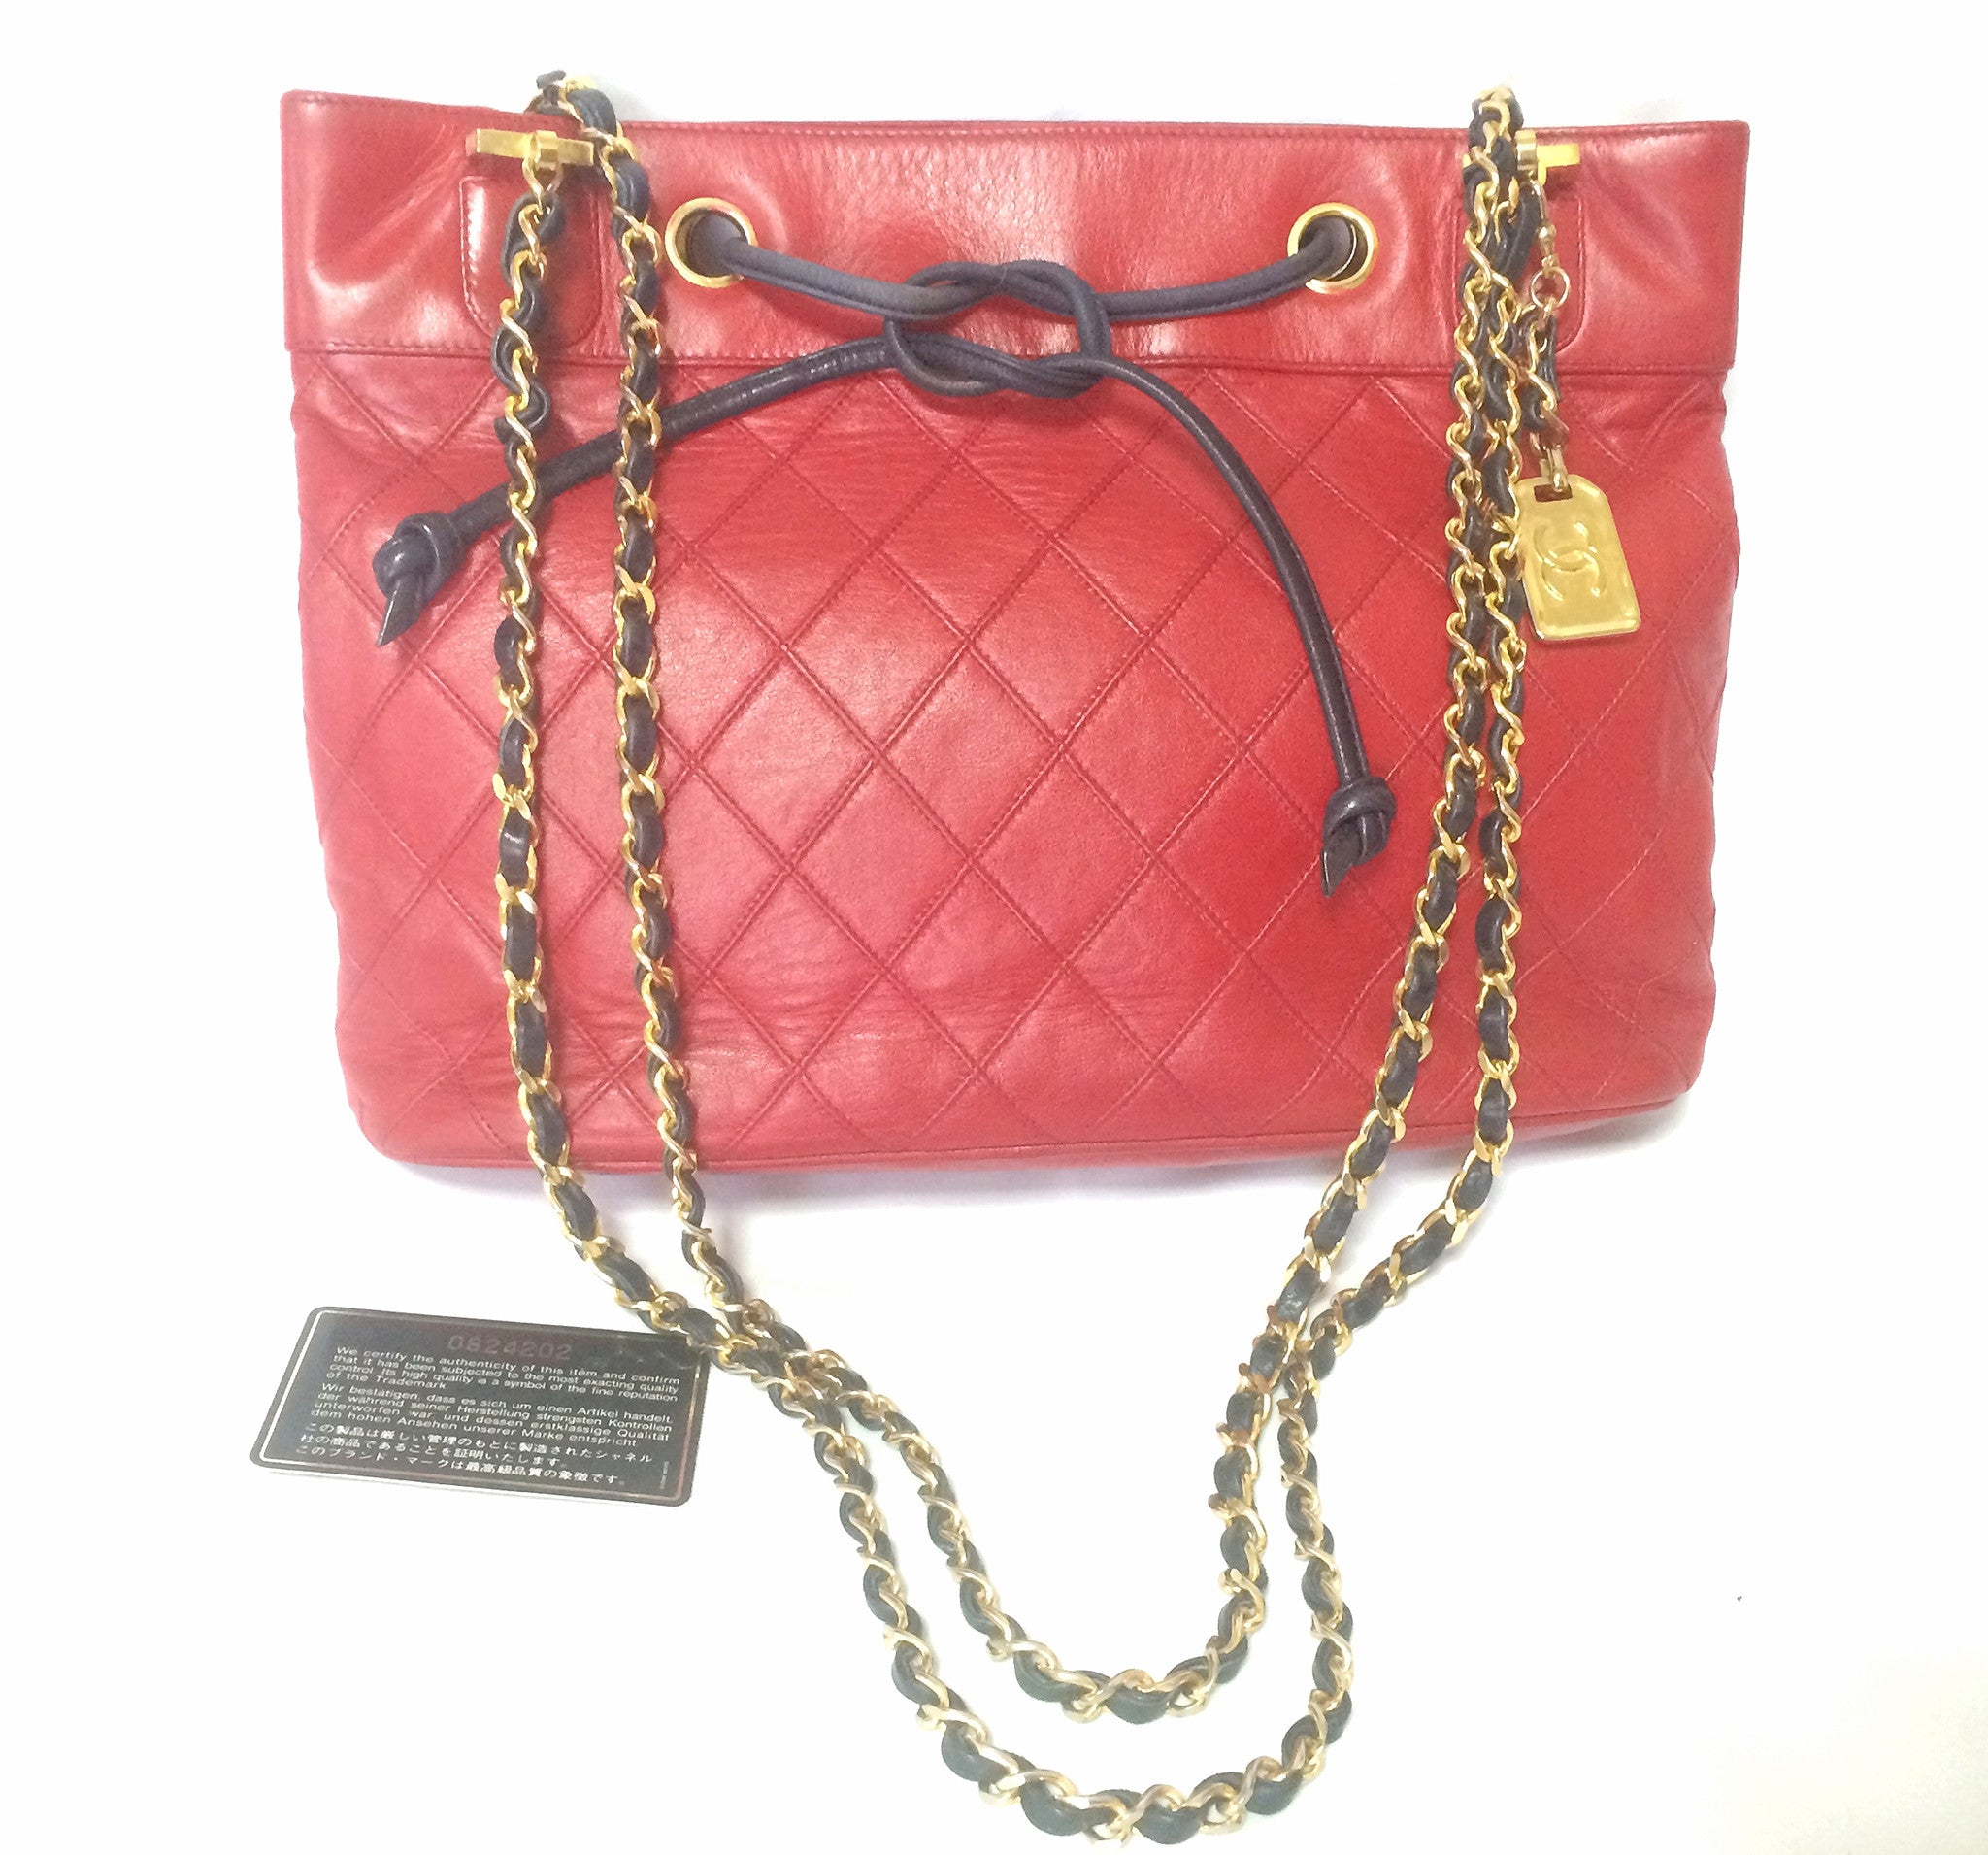 Vintage CHANEL classic tote bag in red leather with gold tone